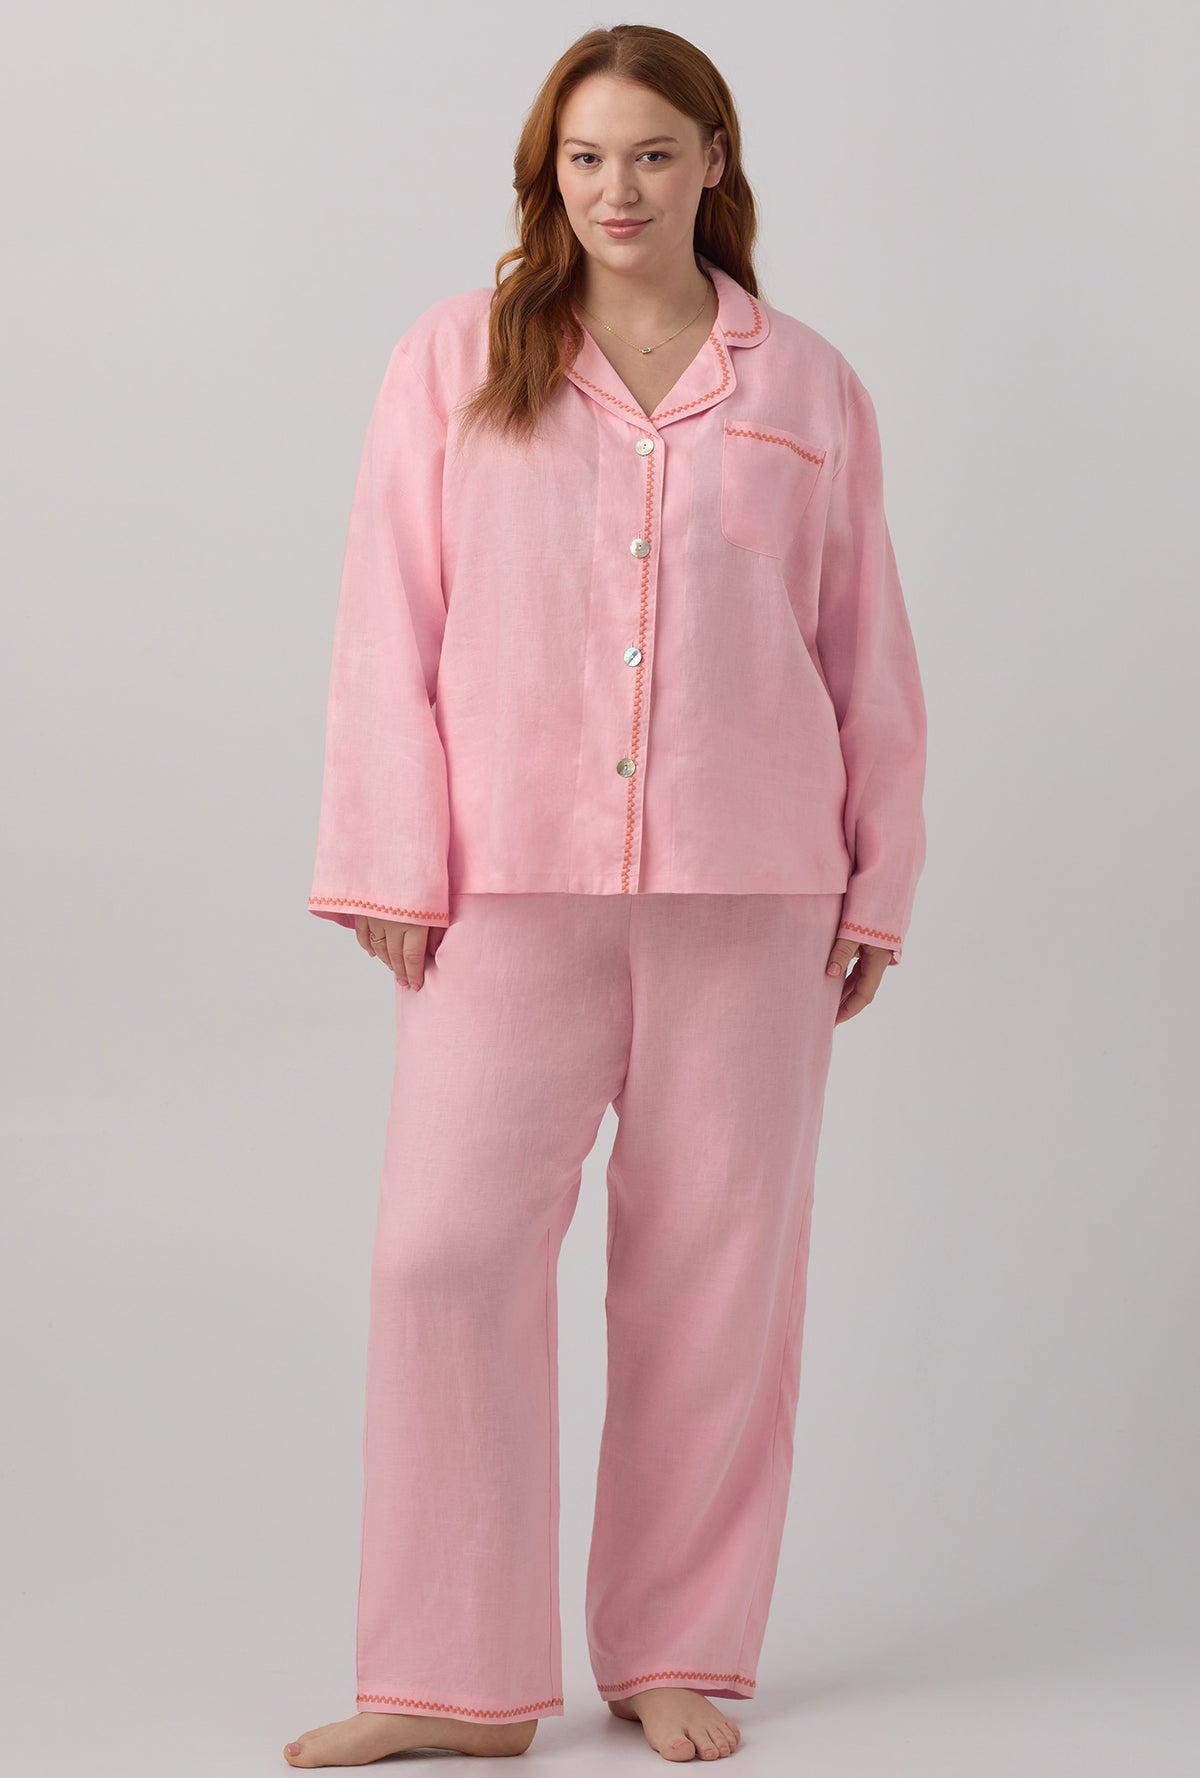 A lady wearing plus size pink Long Sleeve Classic Linen PJ Set with Orchid Pink print.